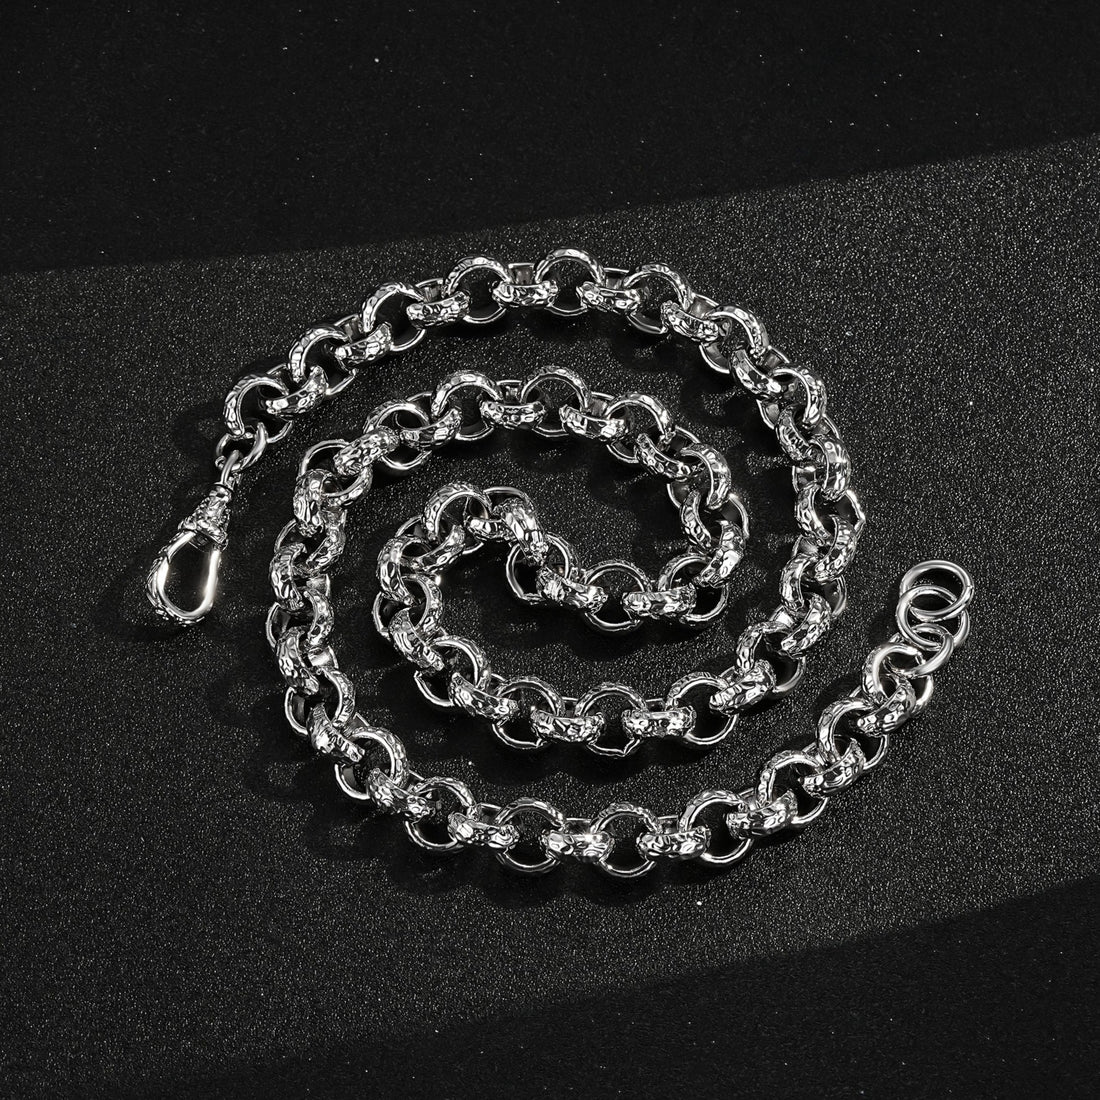 New 12mm Silver Diamond Patterned Belcher Chain With Albert Clasp - 24 Inches